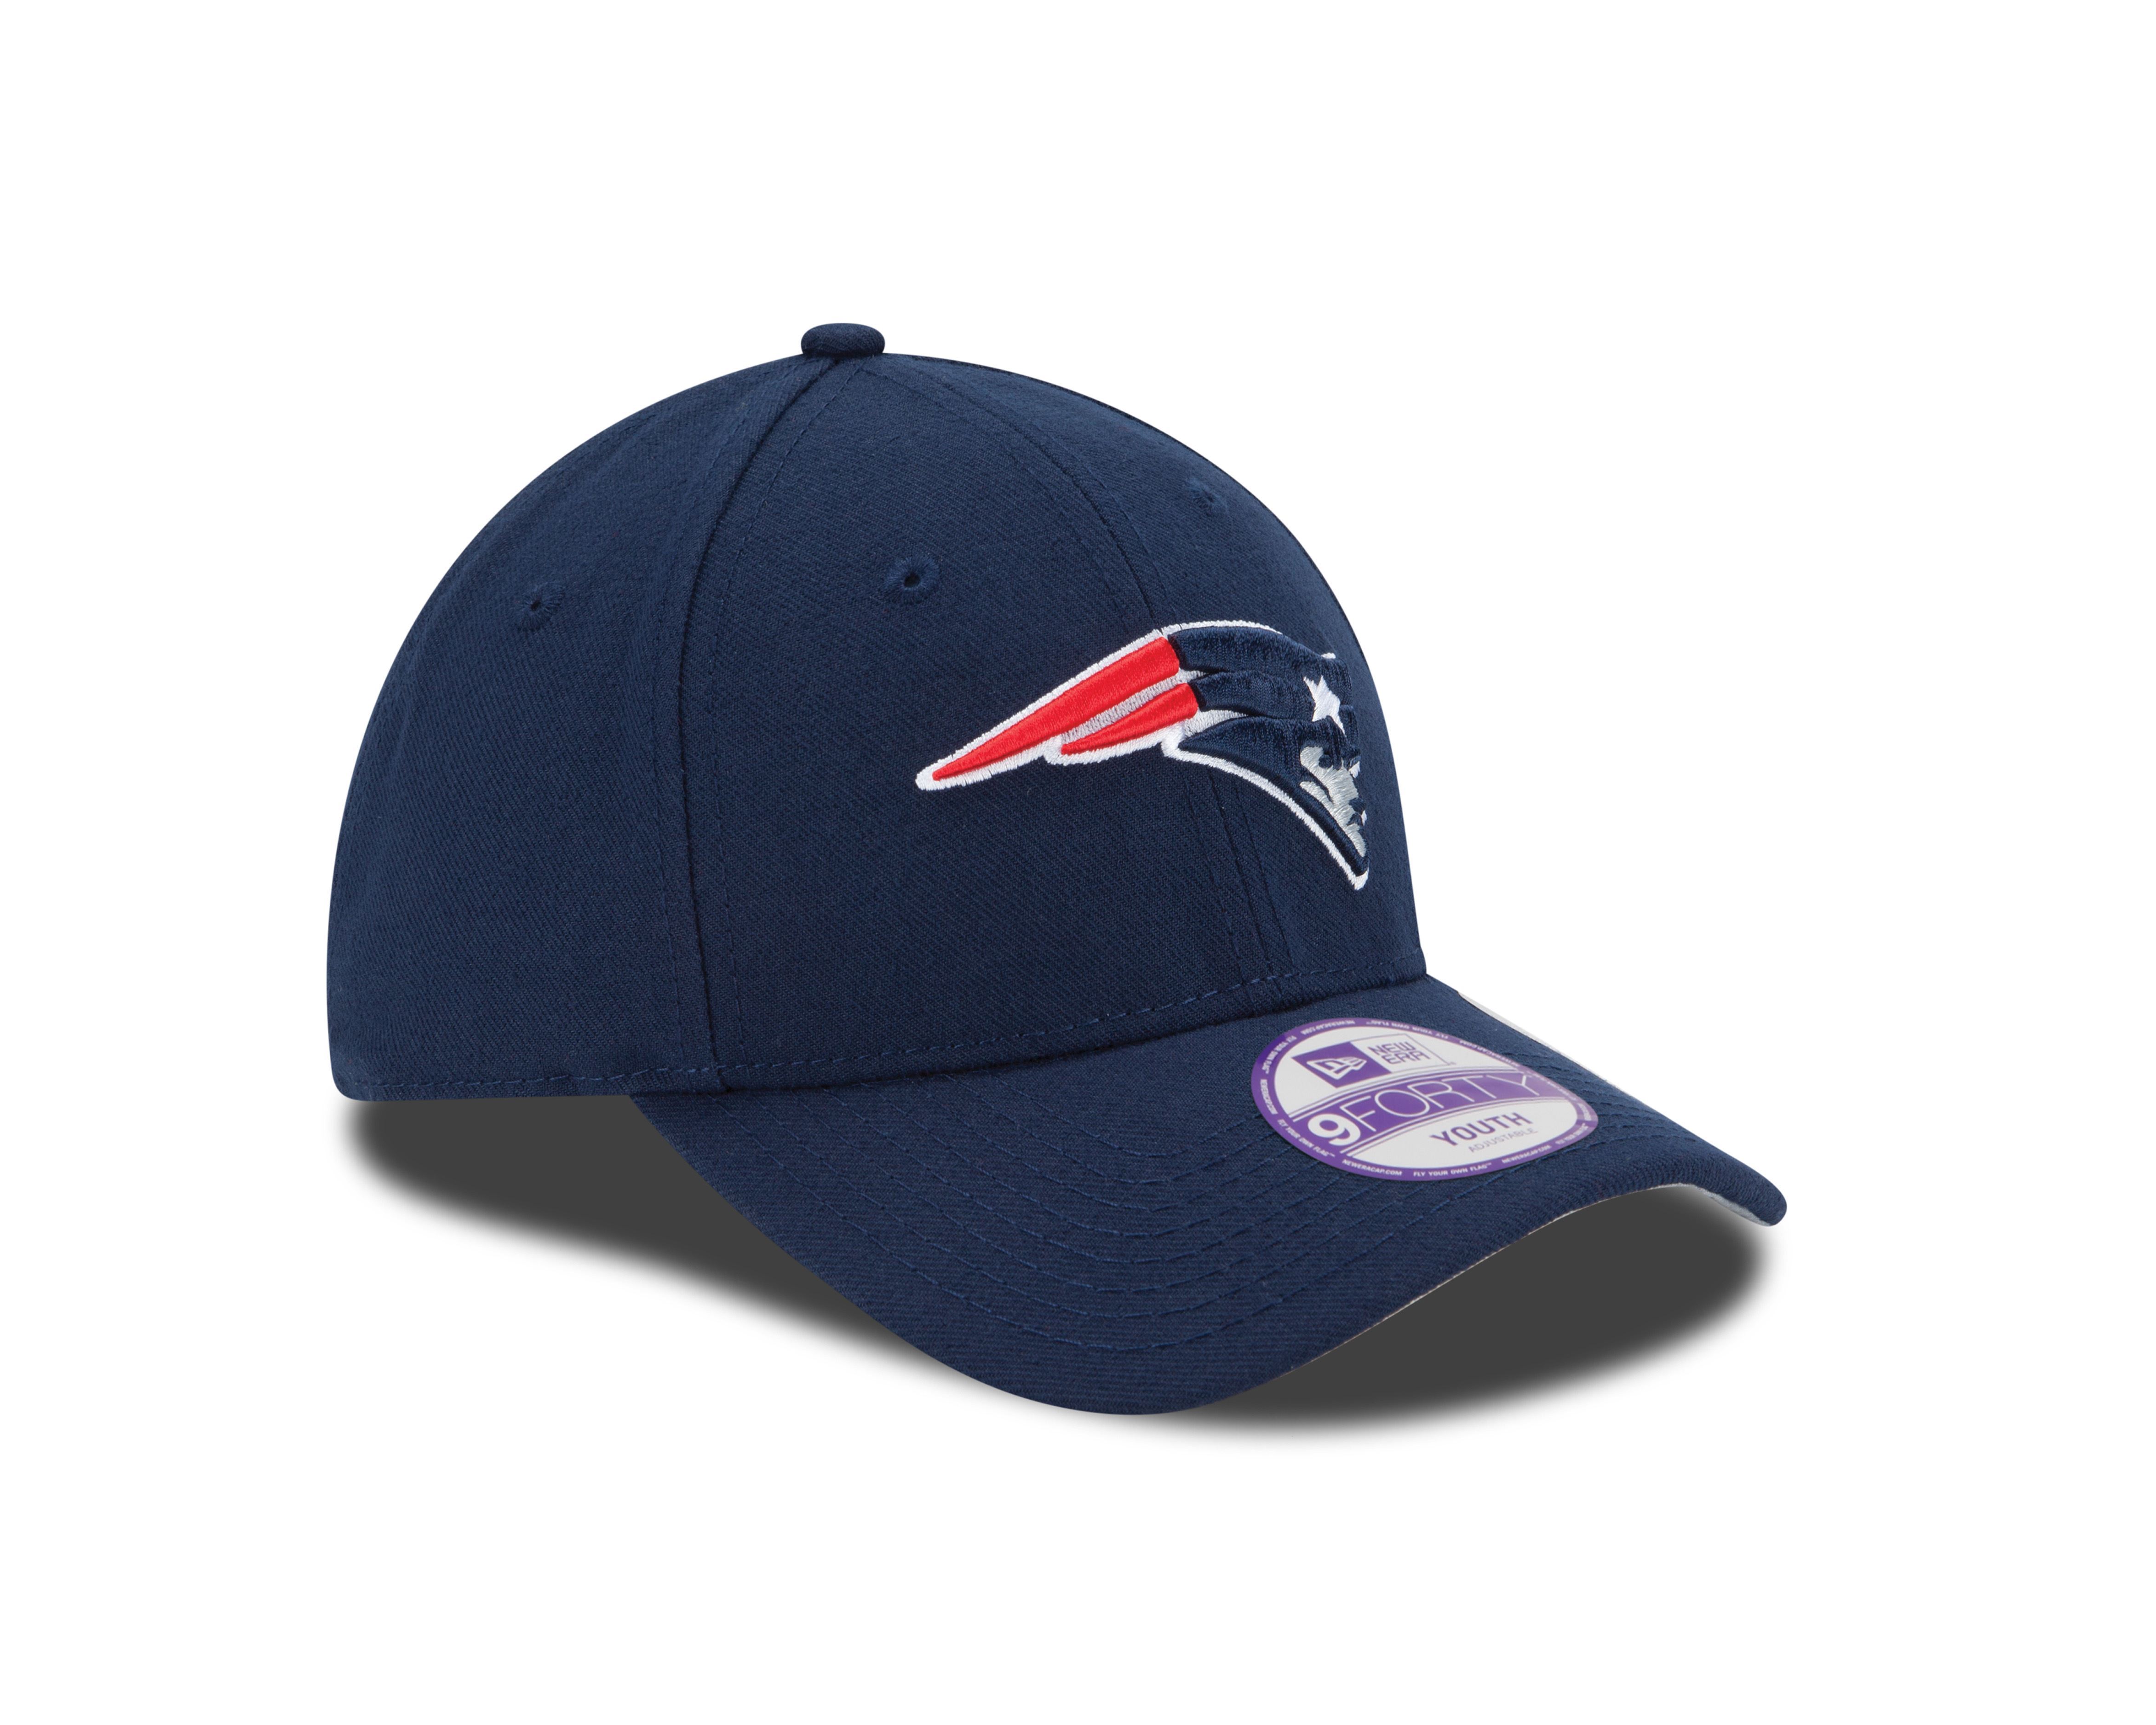 New England Patriots NFL The League Blue 9Forty Adjustable Cap for Kids New Era